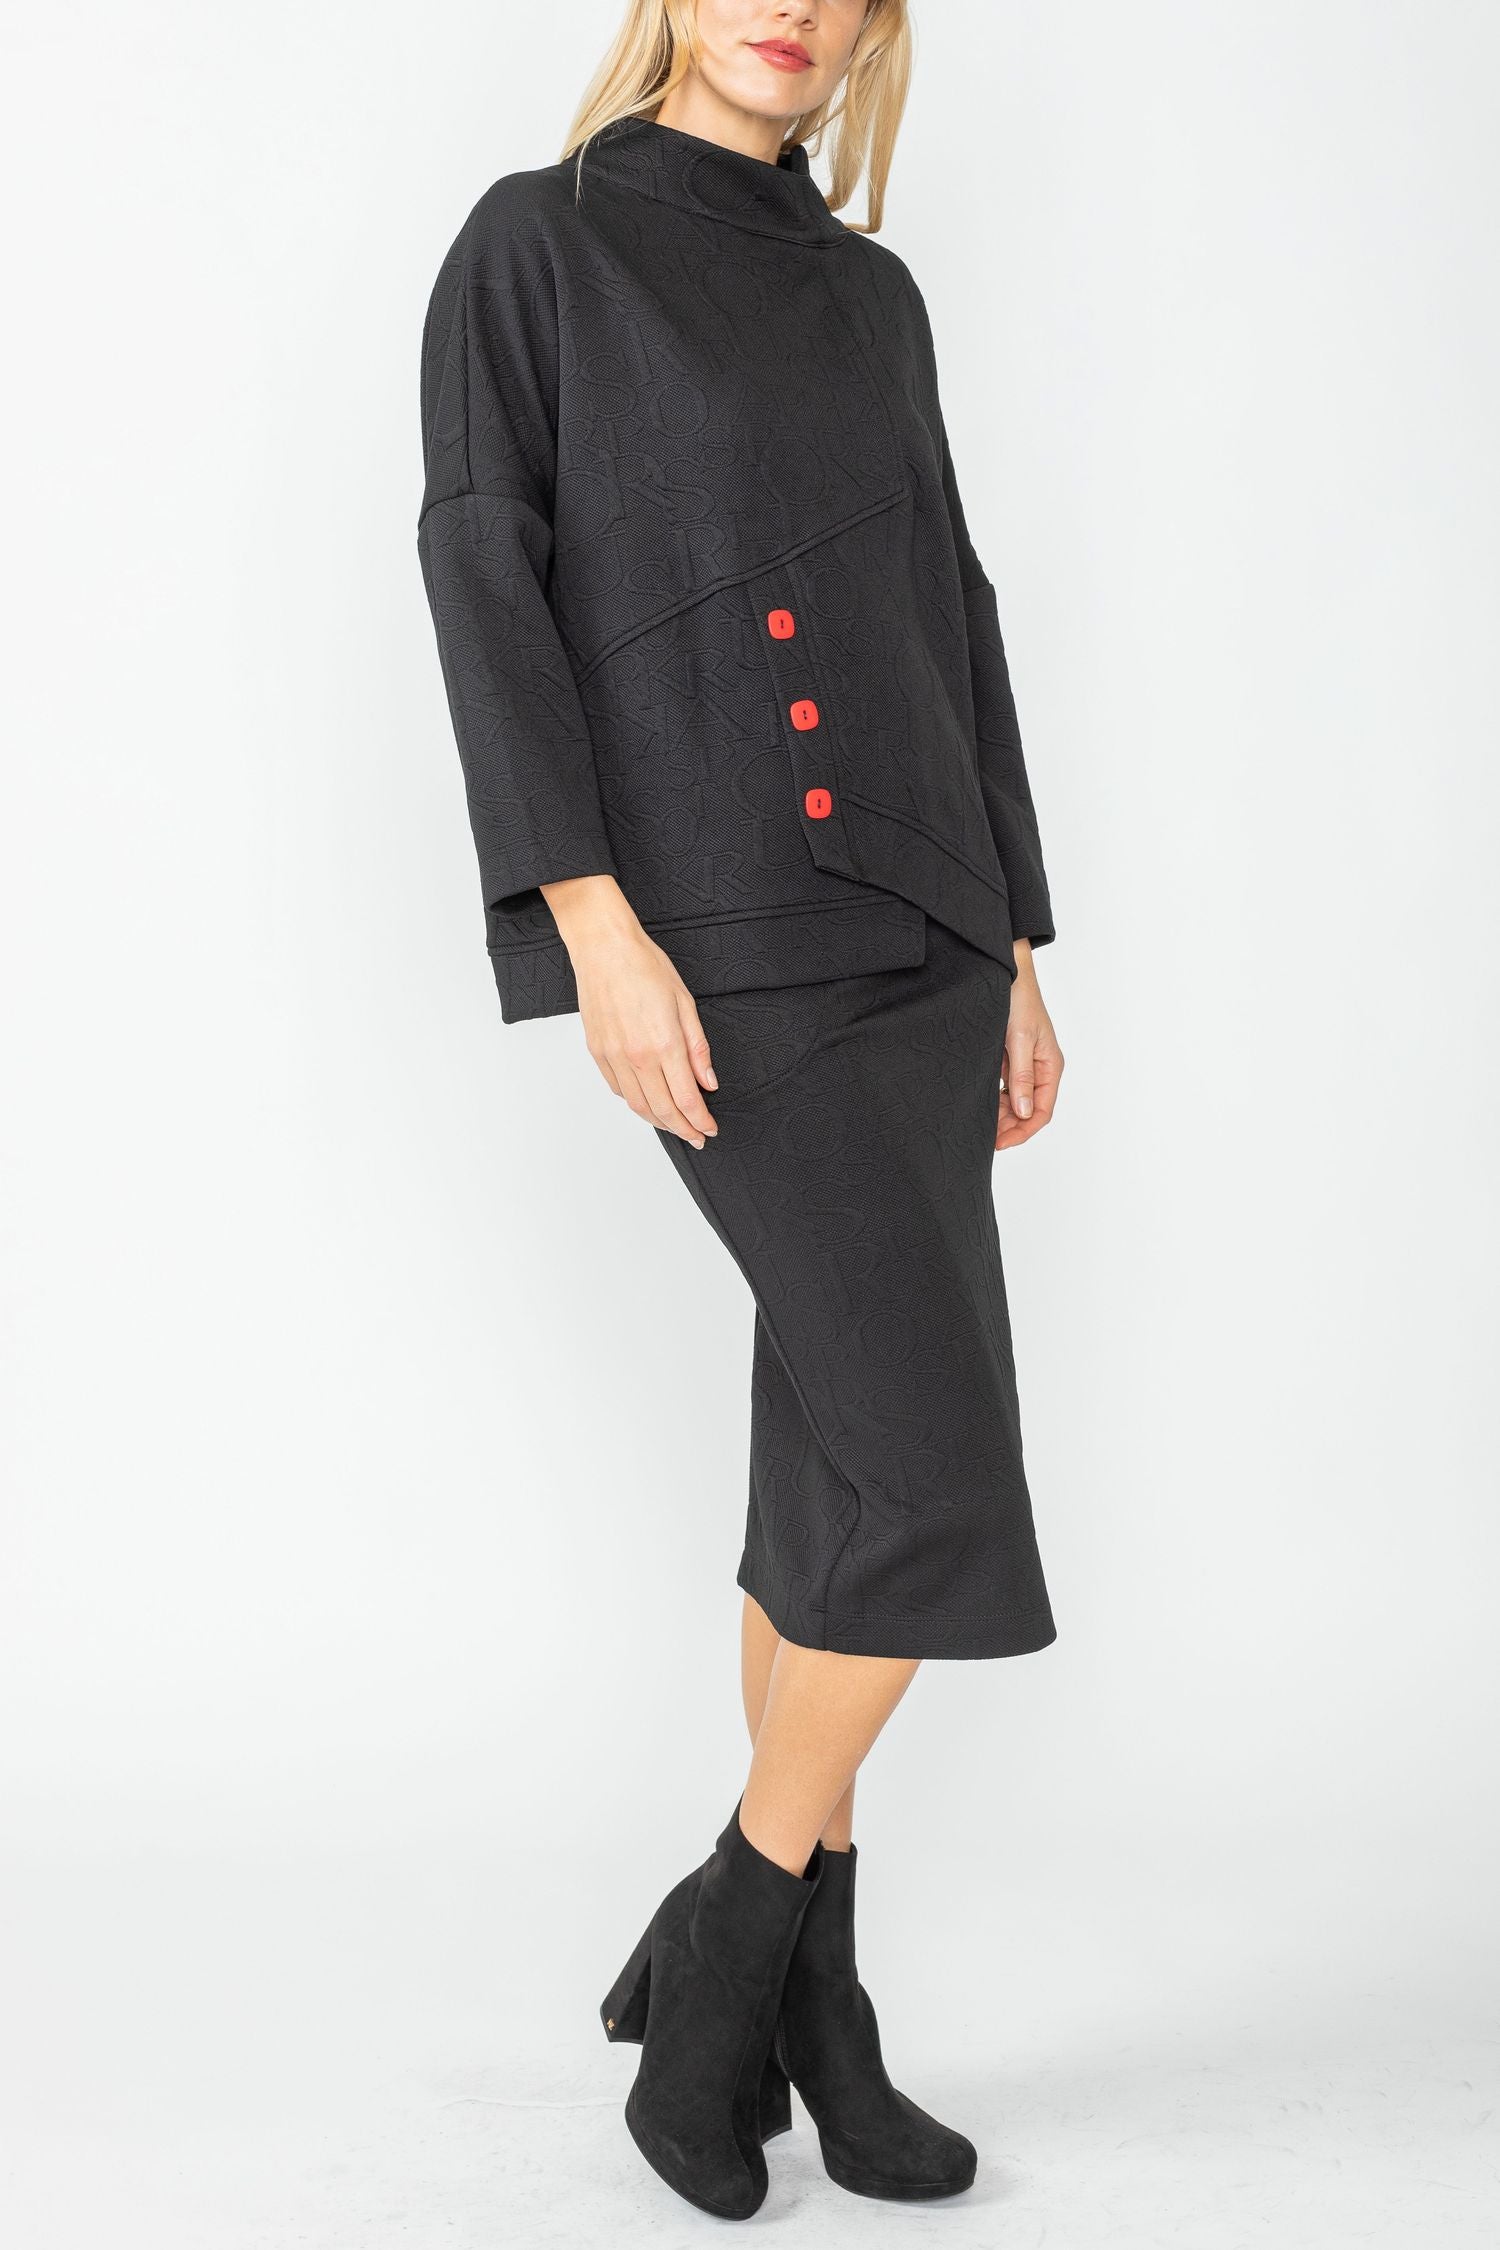 Black and Red Asymmetrical Stand Collar Loose-Fit Top